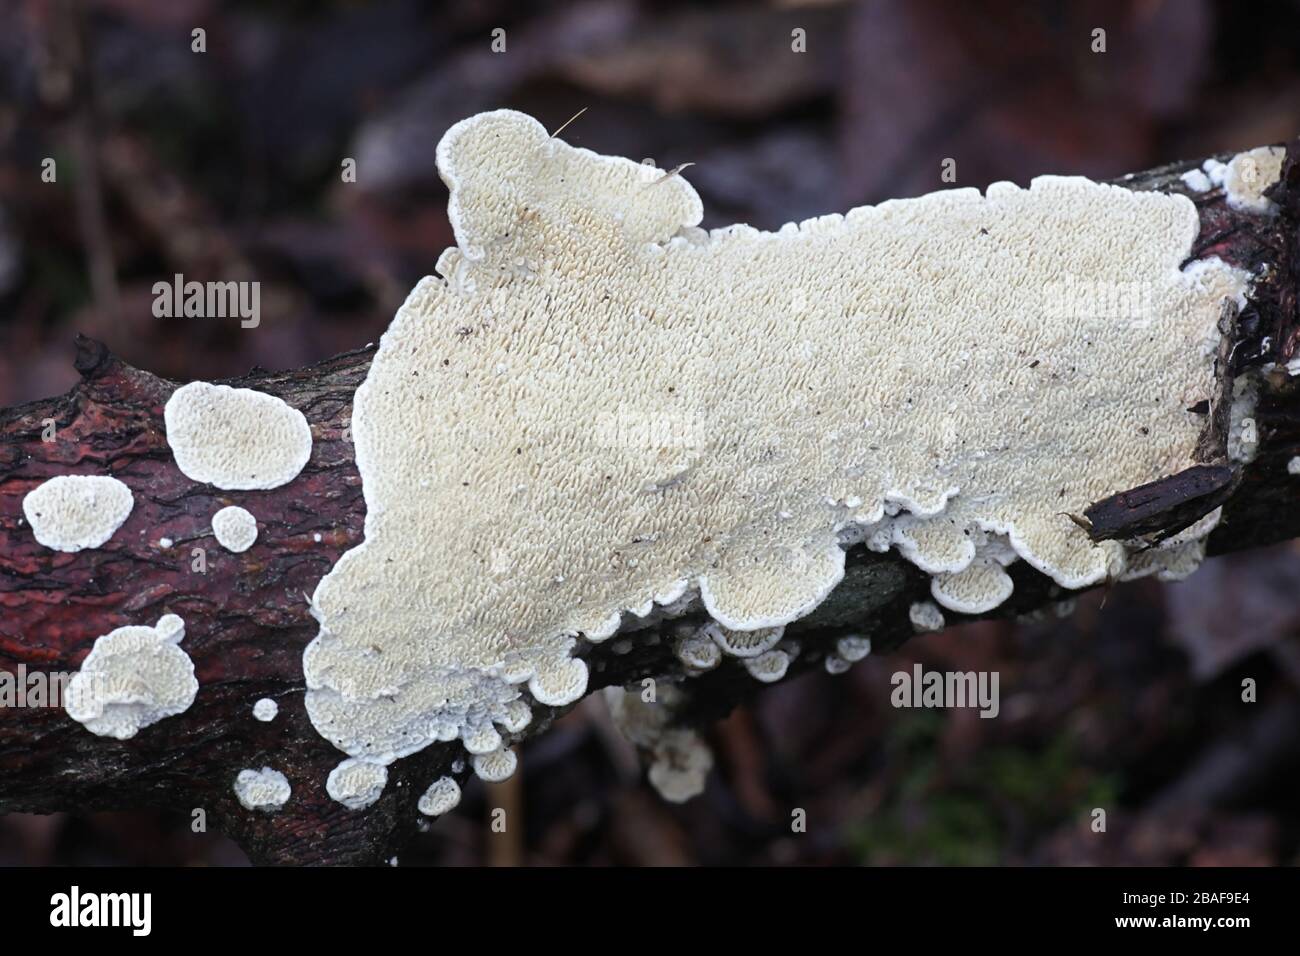 Irpex lacteus, a white rot crust fungus studied for biofuel production Stock Photo